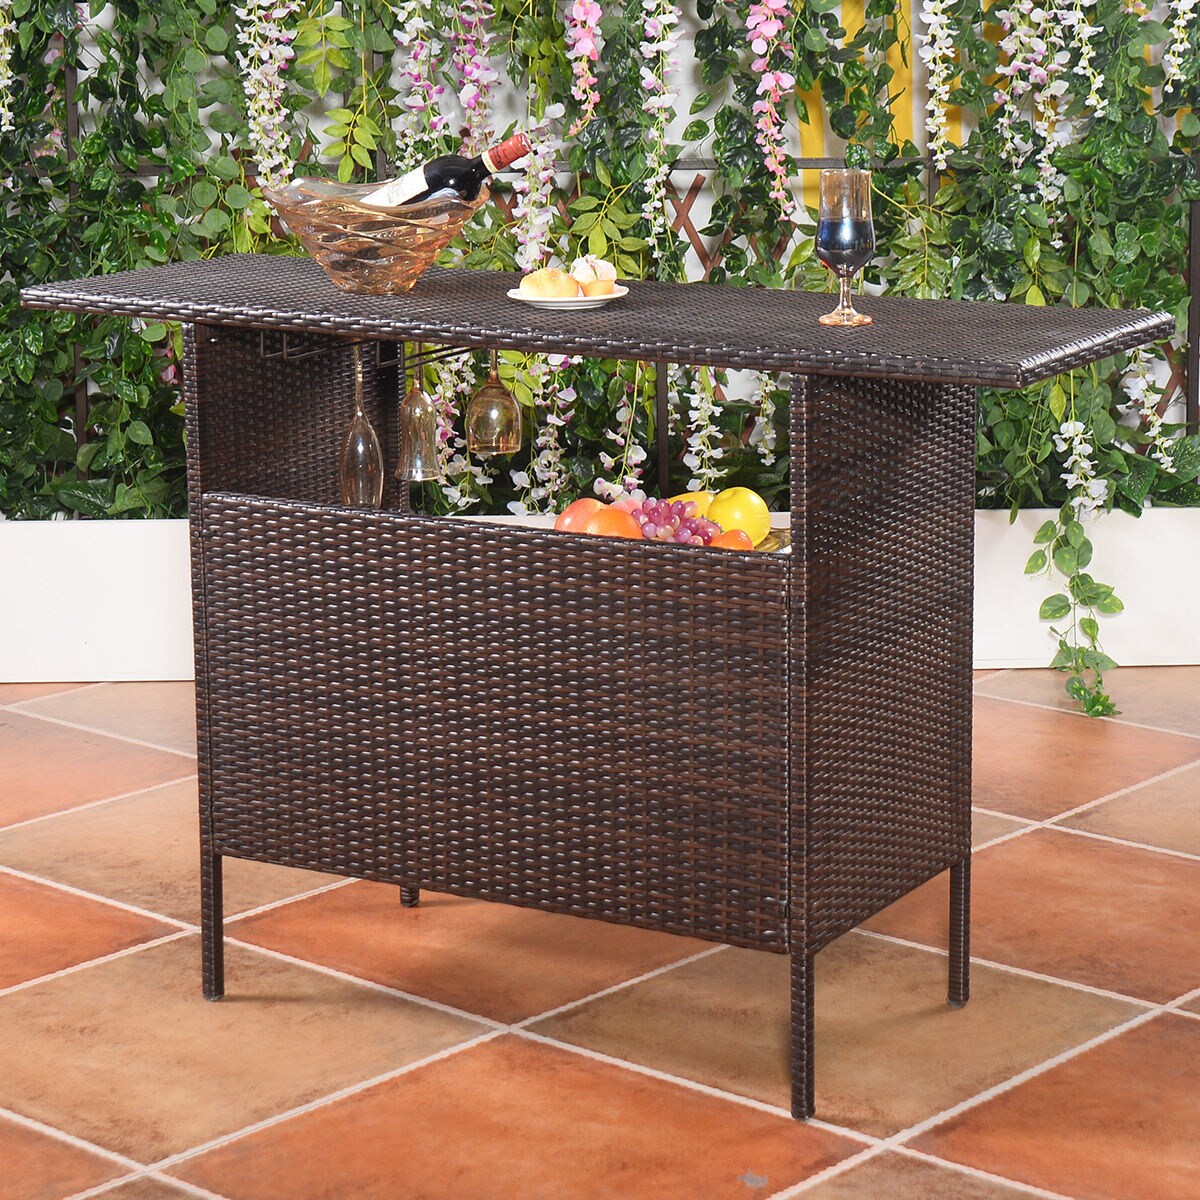 CASAINC Rectangle Rattan Outdoor Bar Height Table 18.5-in W x 55.1-in L